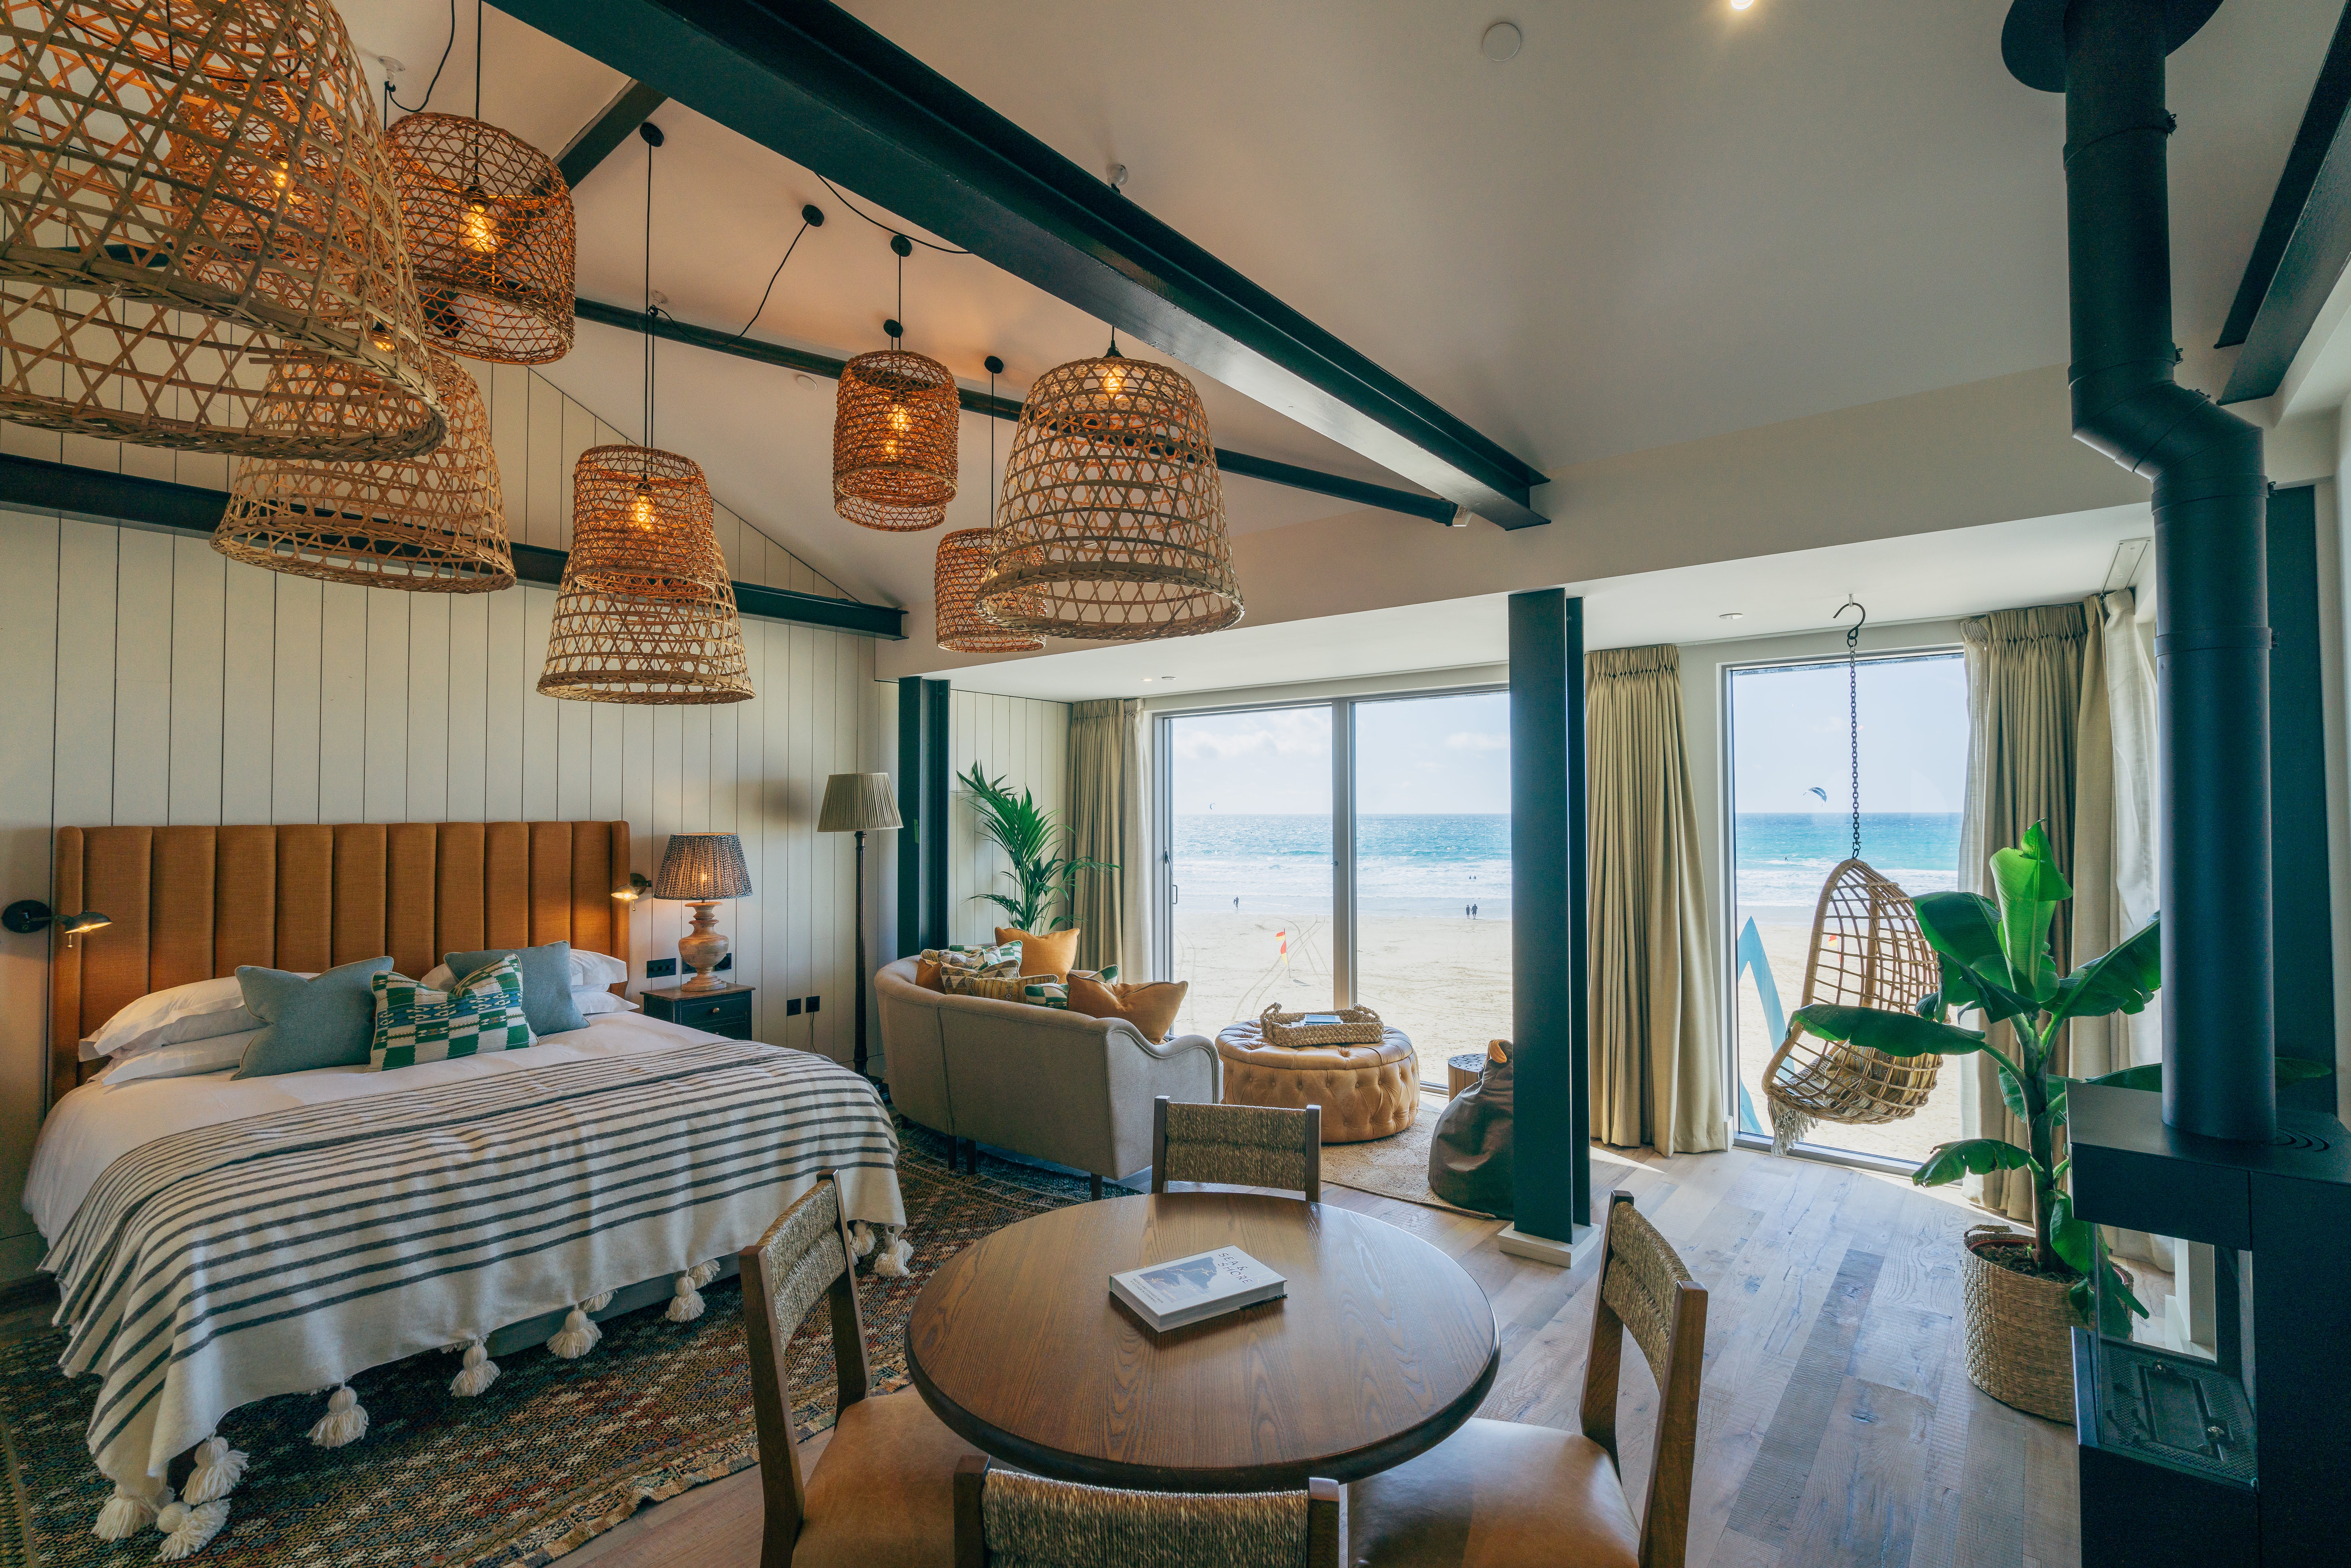 You can request a dog bed as a delightful addition to this beachside room